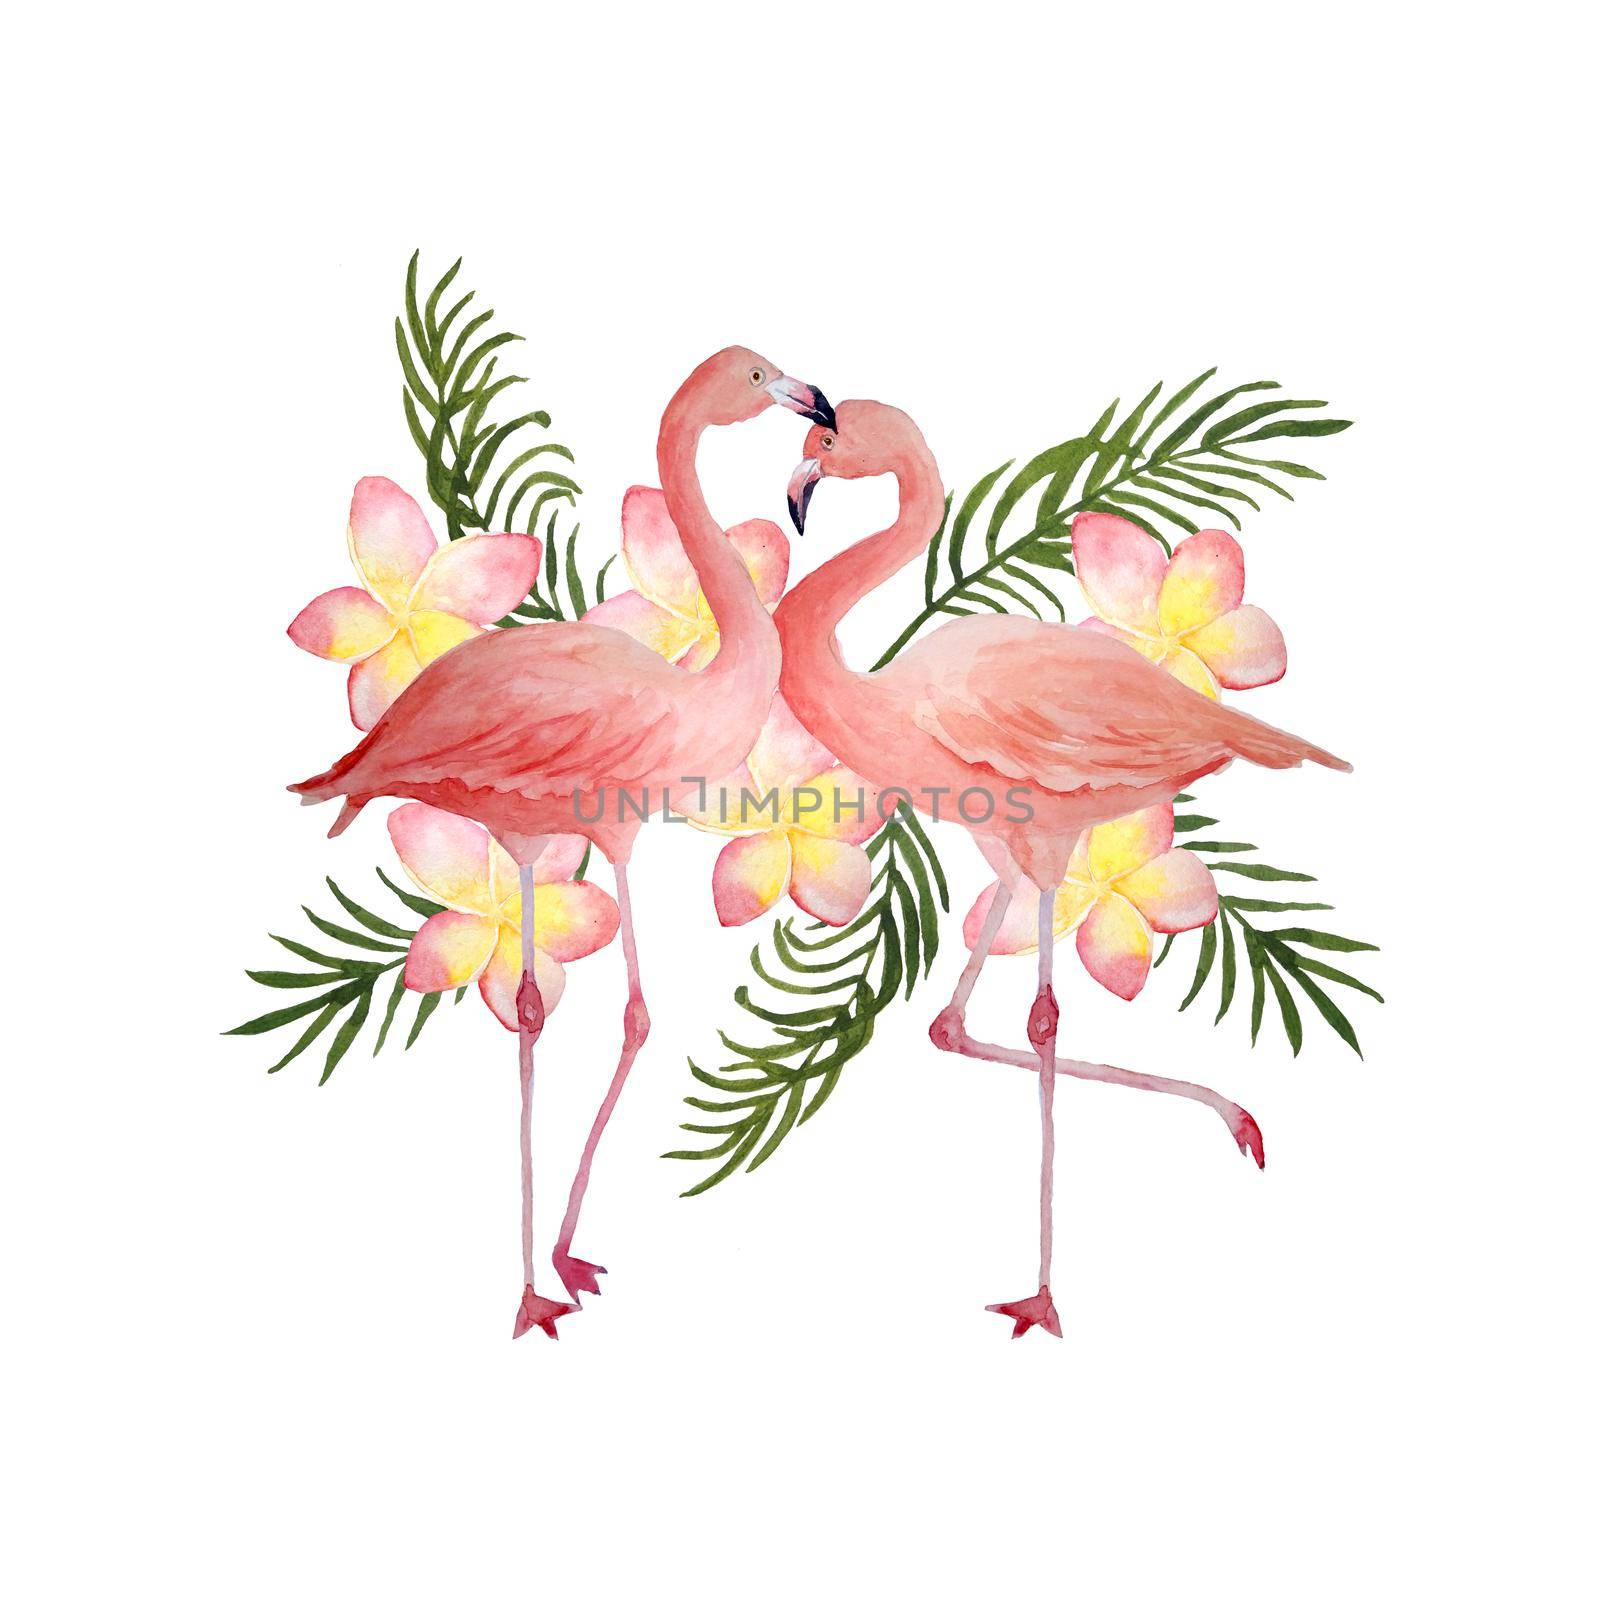 Two pink flamingo, romantic couple in love with palm leaves plumeria frangipani flowers. Tropical exotic bird rose flamingos. Watercolor hand drawn realistic animal illustration. Wedding cards invitation st valentine day